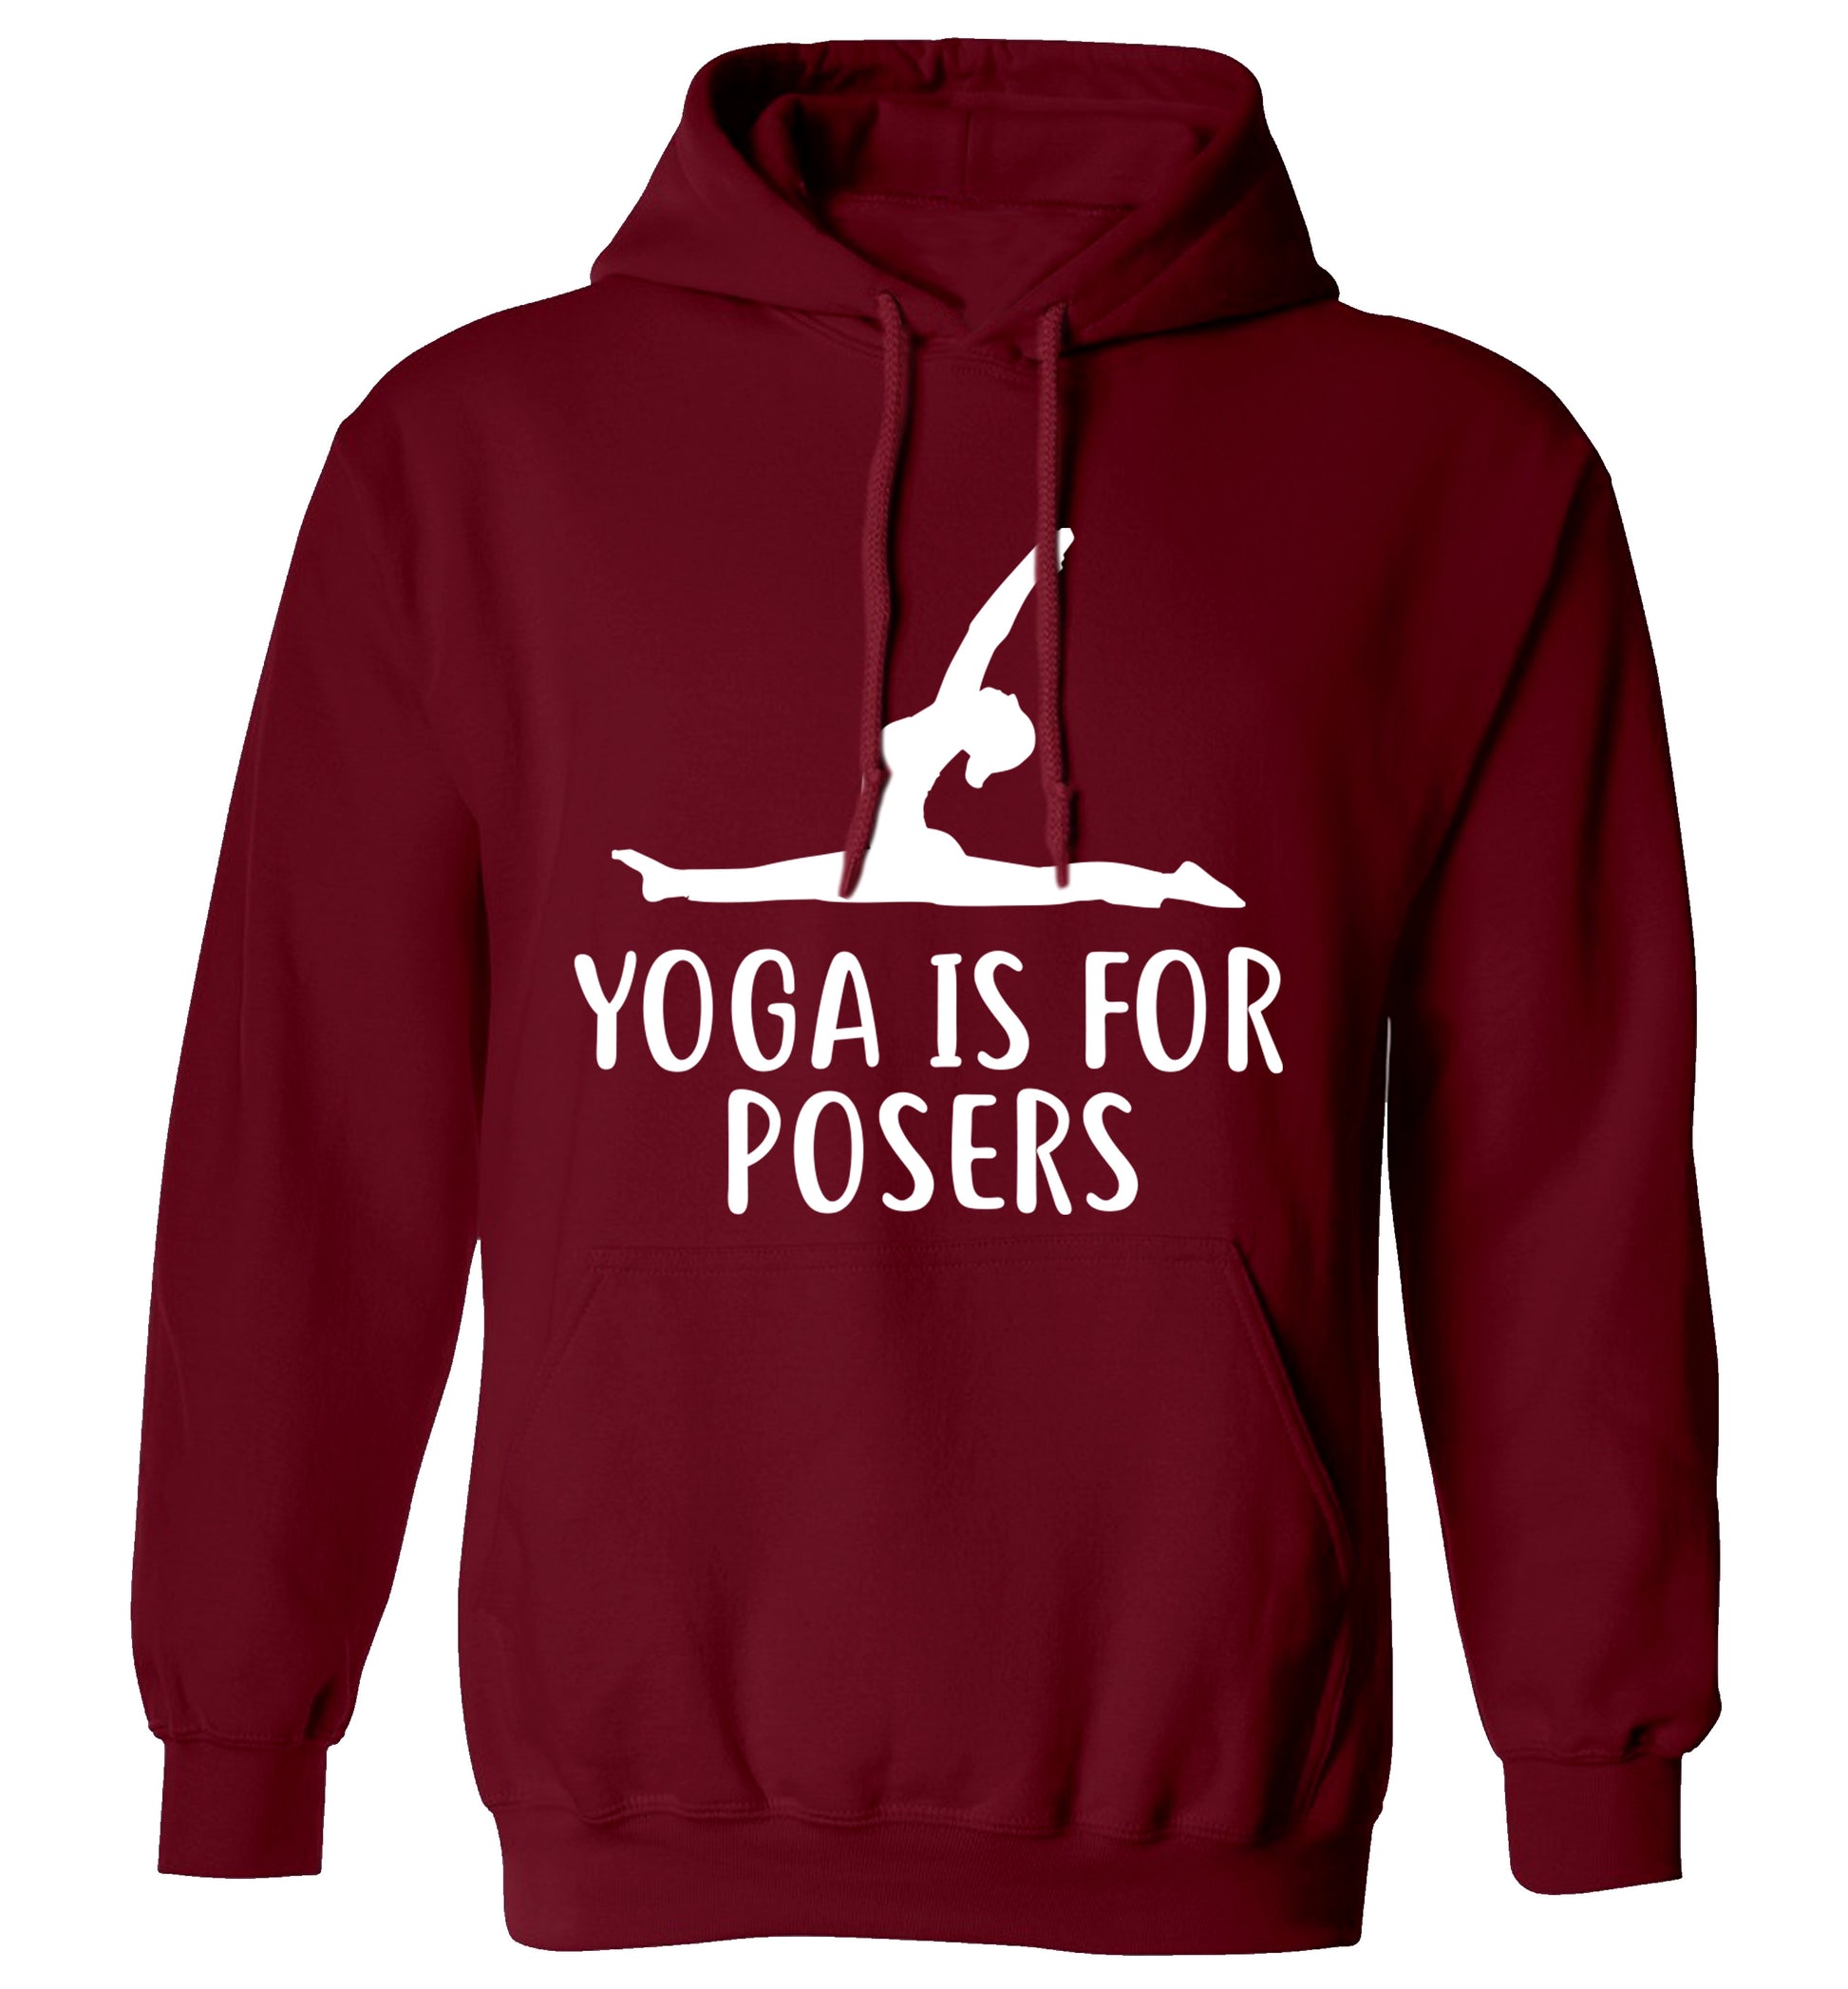 Yoga is for posers adults unisex maroon hoodie 2XL